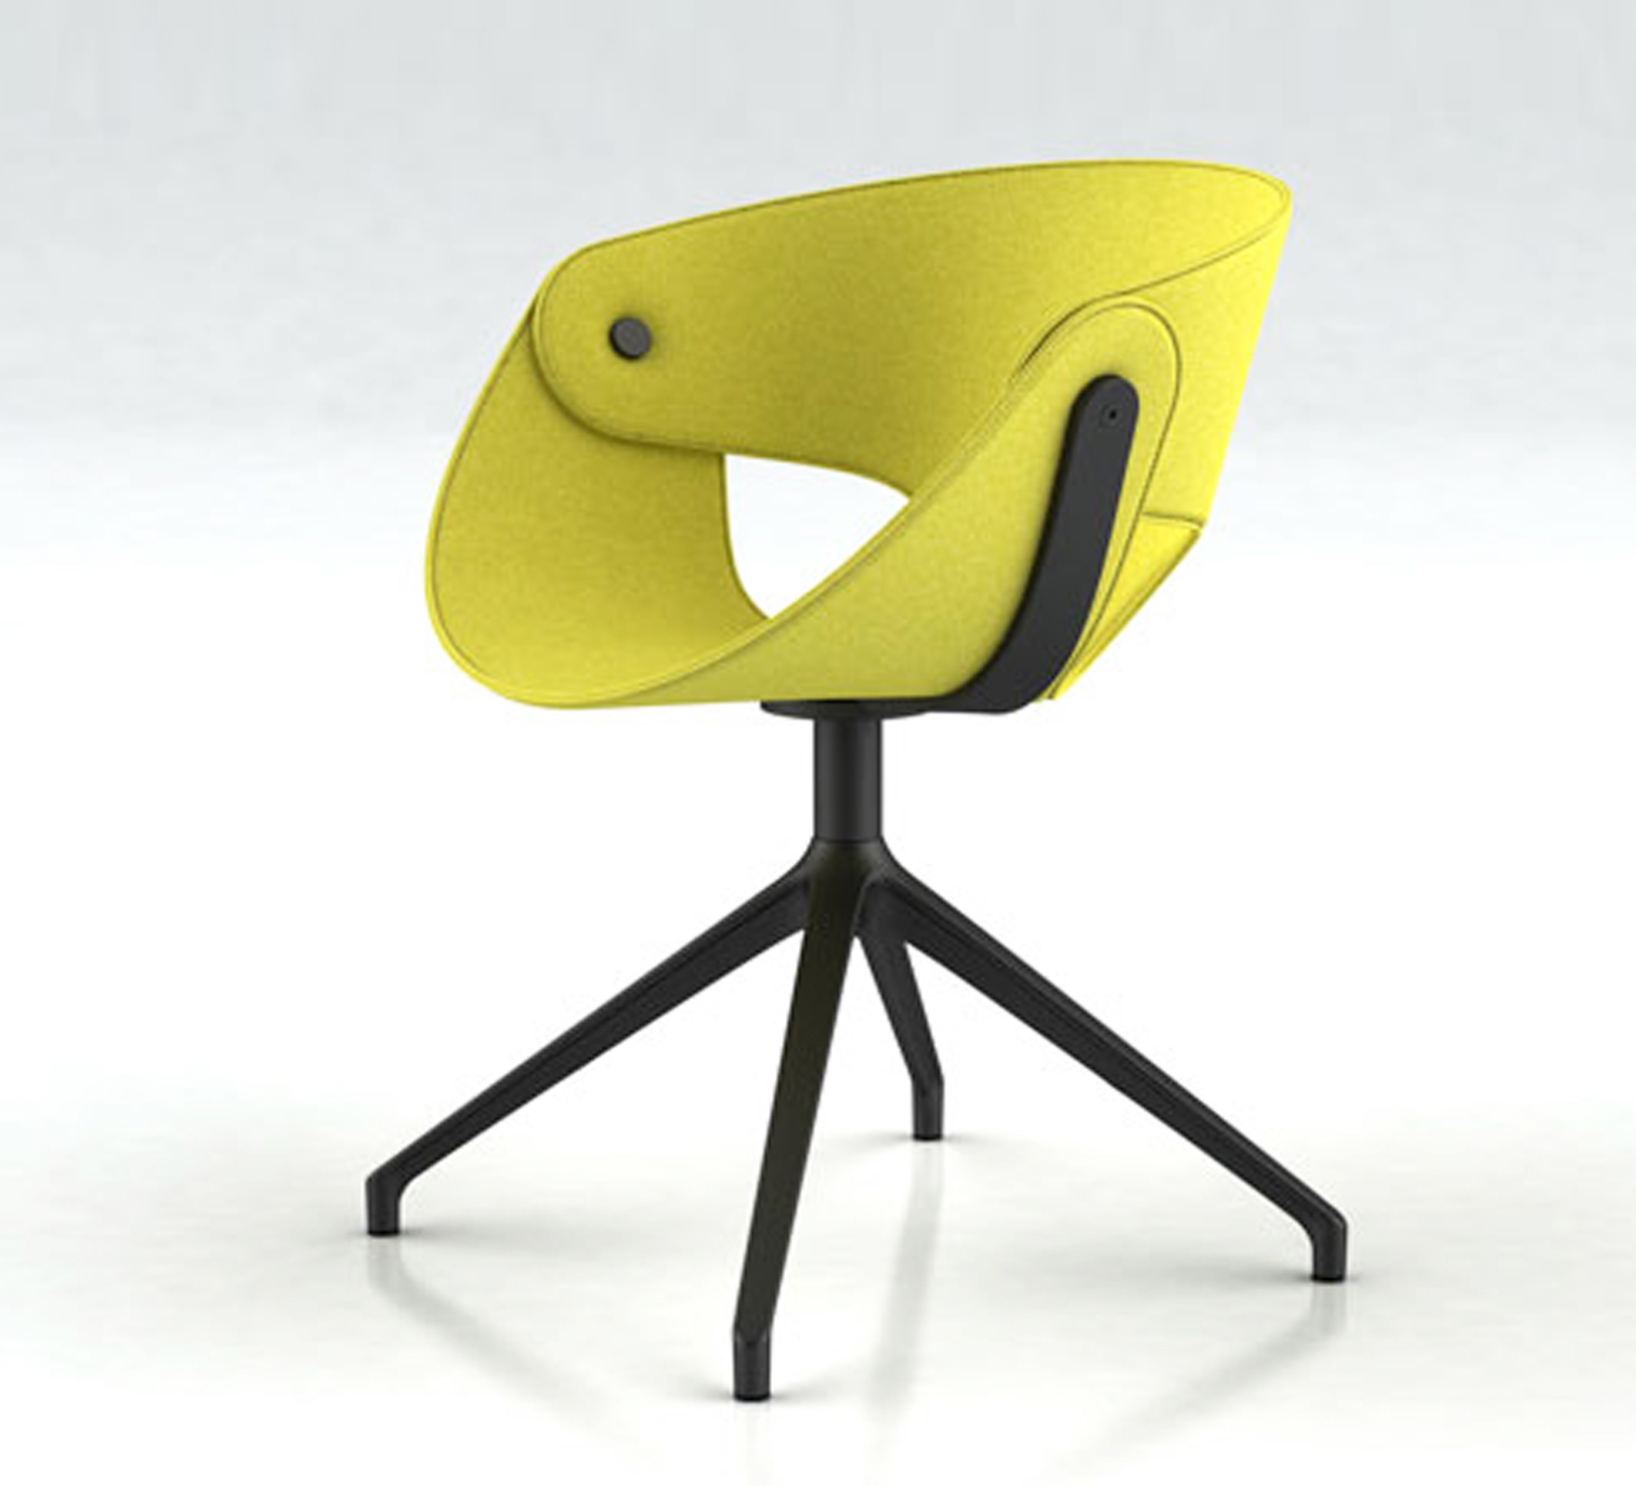 spectacular yellow Eyelet Chair for modern meeting tables and home offices as a side visitors chair